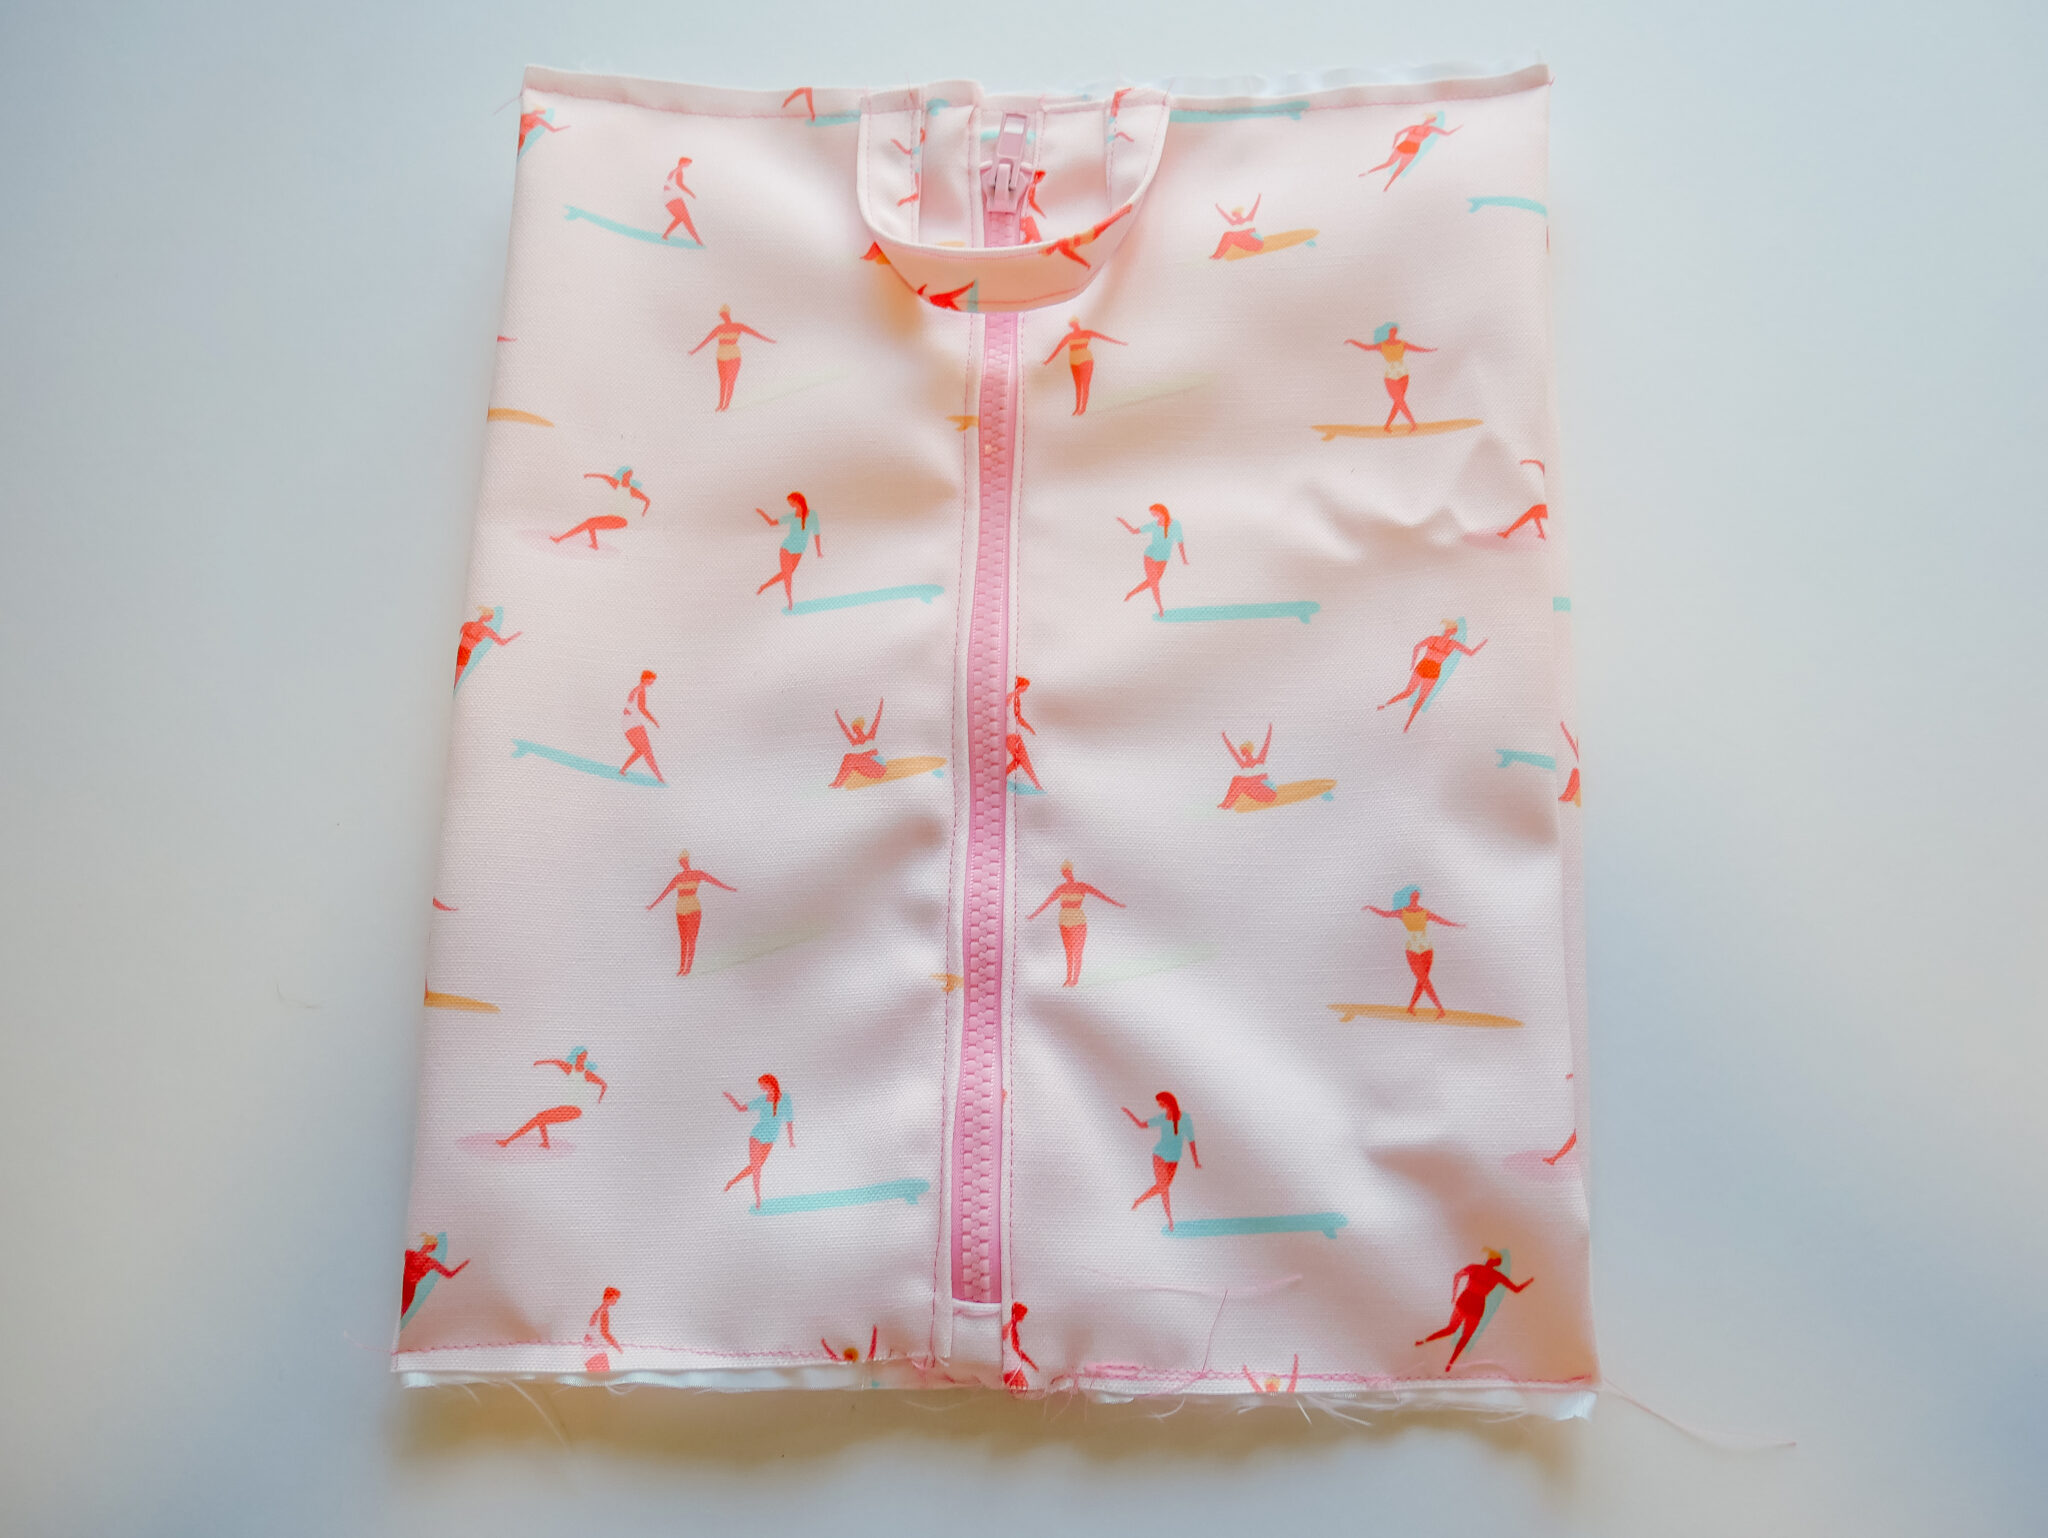 A fabric rectangle featuring a design with small female surfers surfing through a pink background lays on a white surface. A pink zipper has been stitched up the middle. A U-shaped handle in the same fabric has been sewn to the top center of the bag. The bag is laying on a white surface.